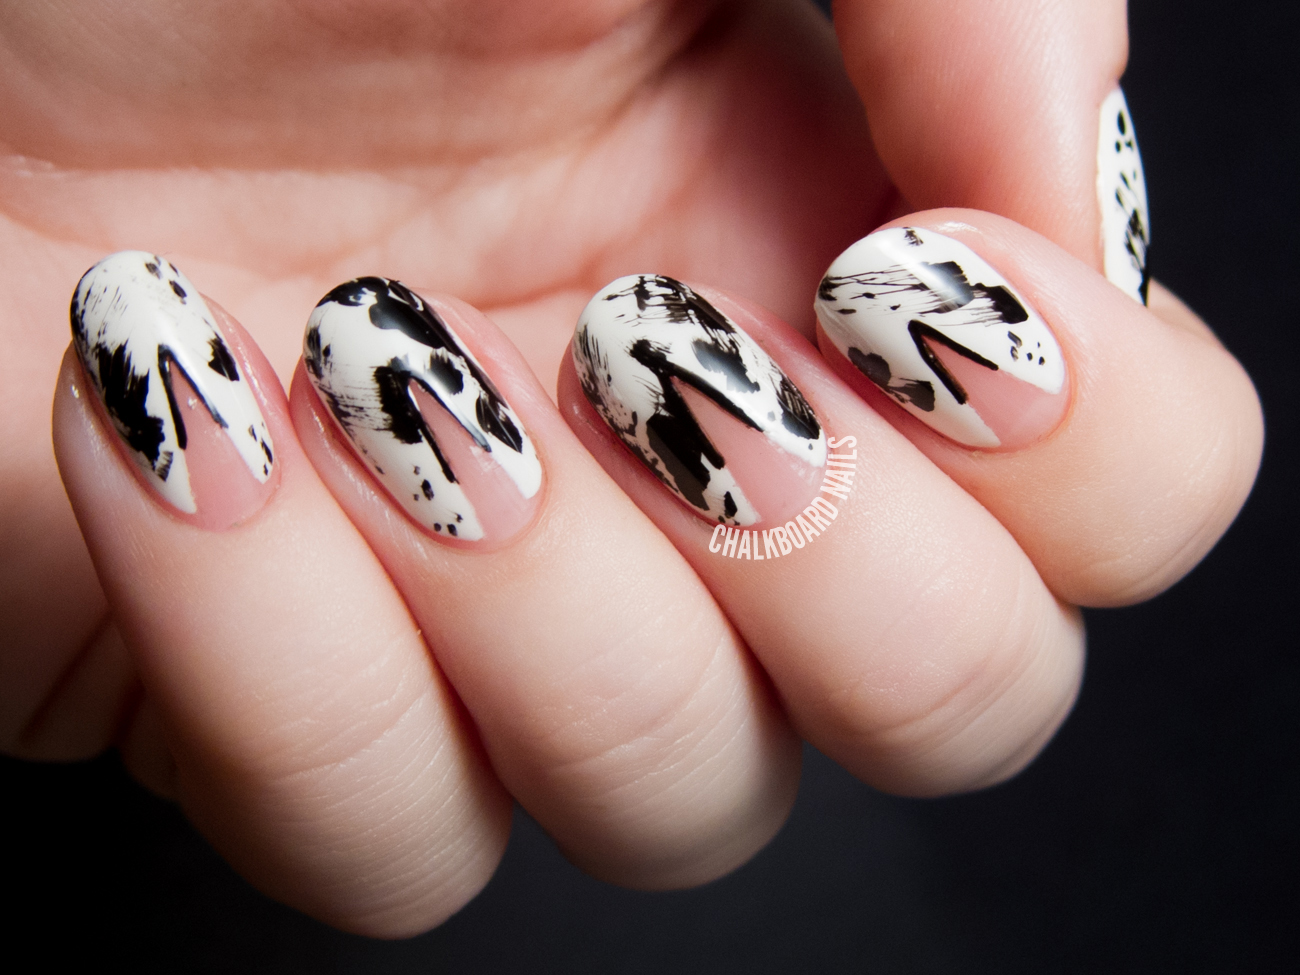 7. Pointed Nail Designs with Negative Space - wide 3